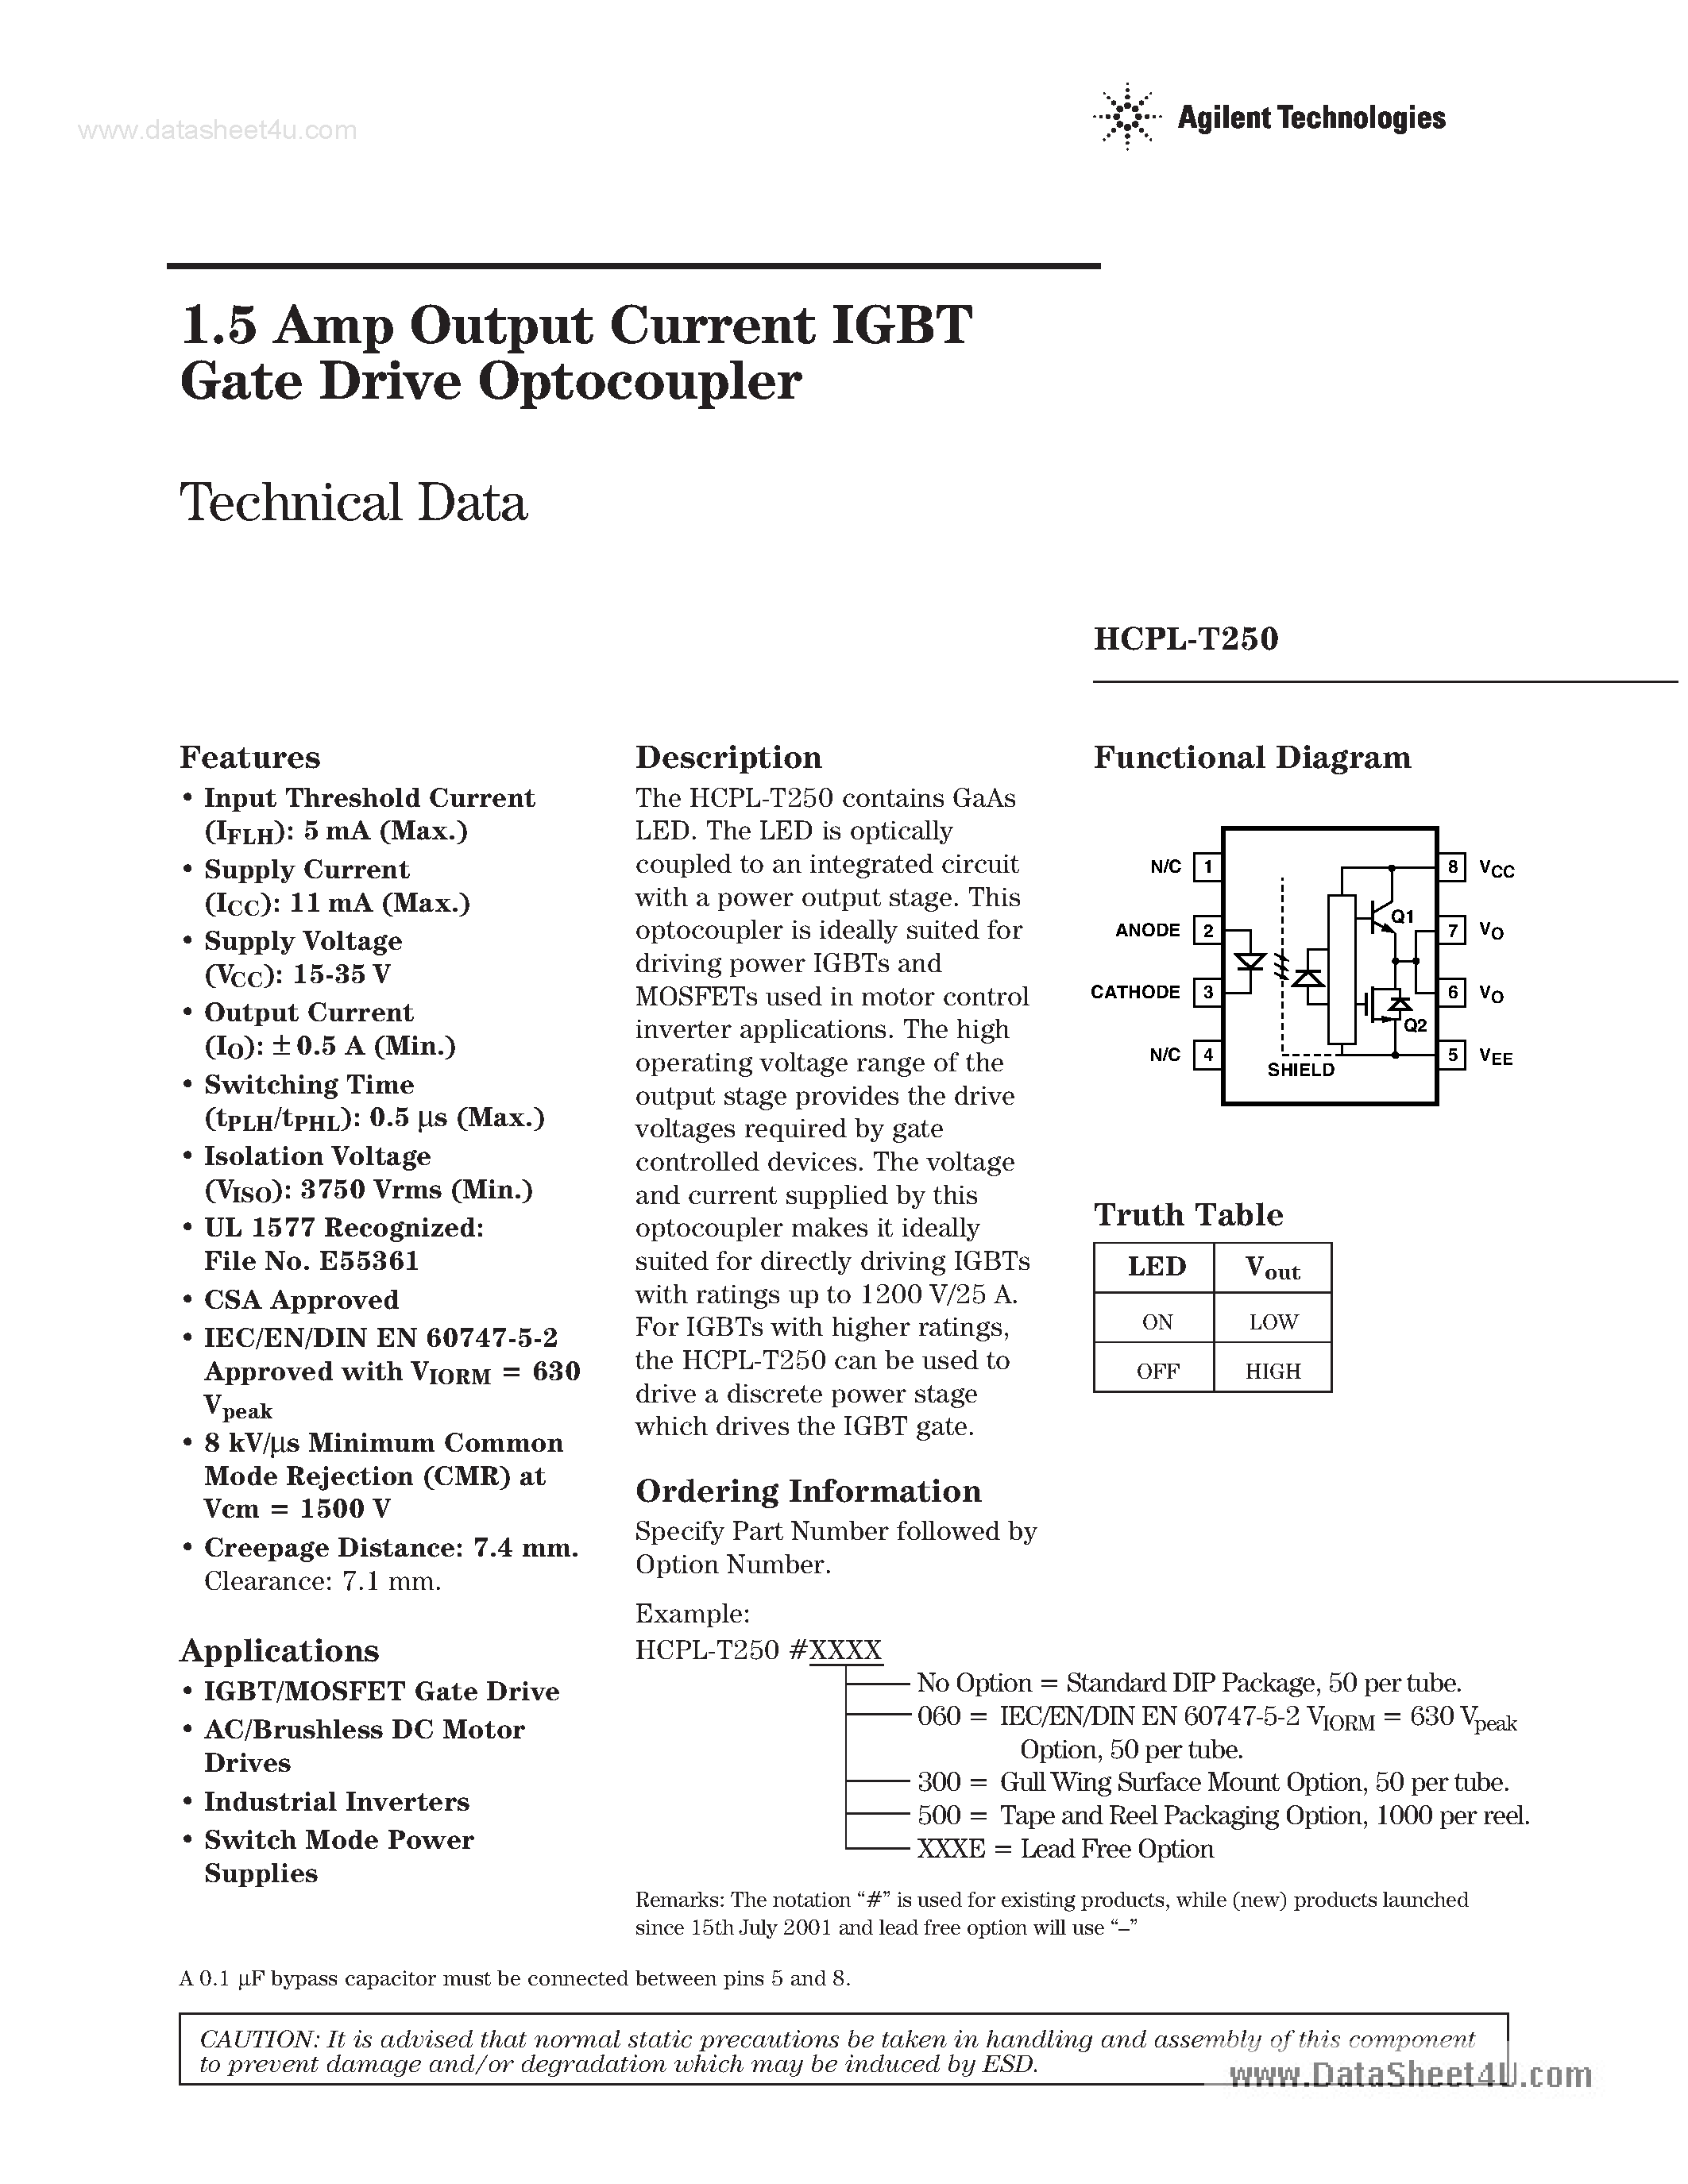 Datasheet HCPL-T250 - 1.5 Amp Output Current IGBT Gate Drive Optocoupler page 1